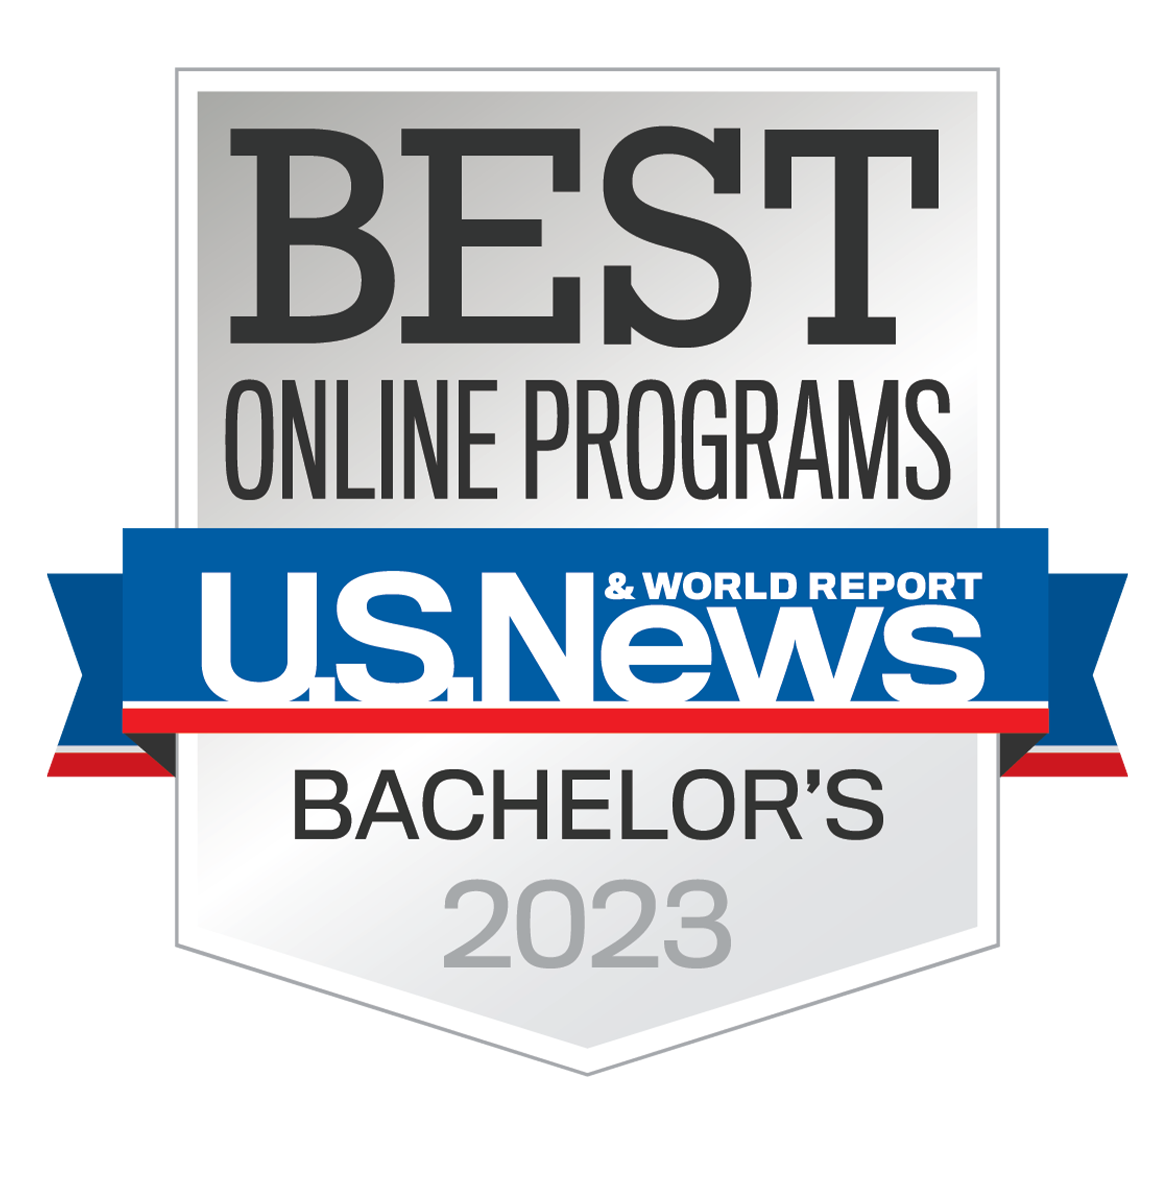 U.S. News and World reports. Best Online Programs: Bachelor's Overall 2023